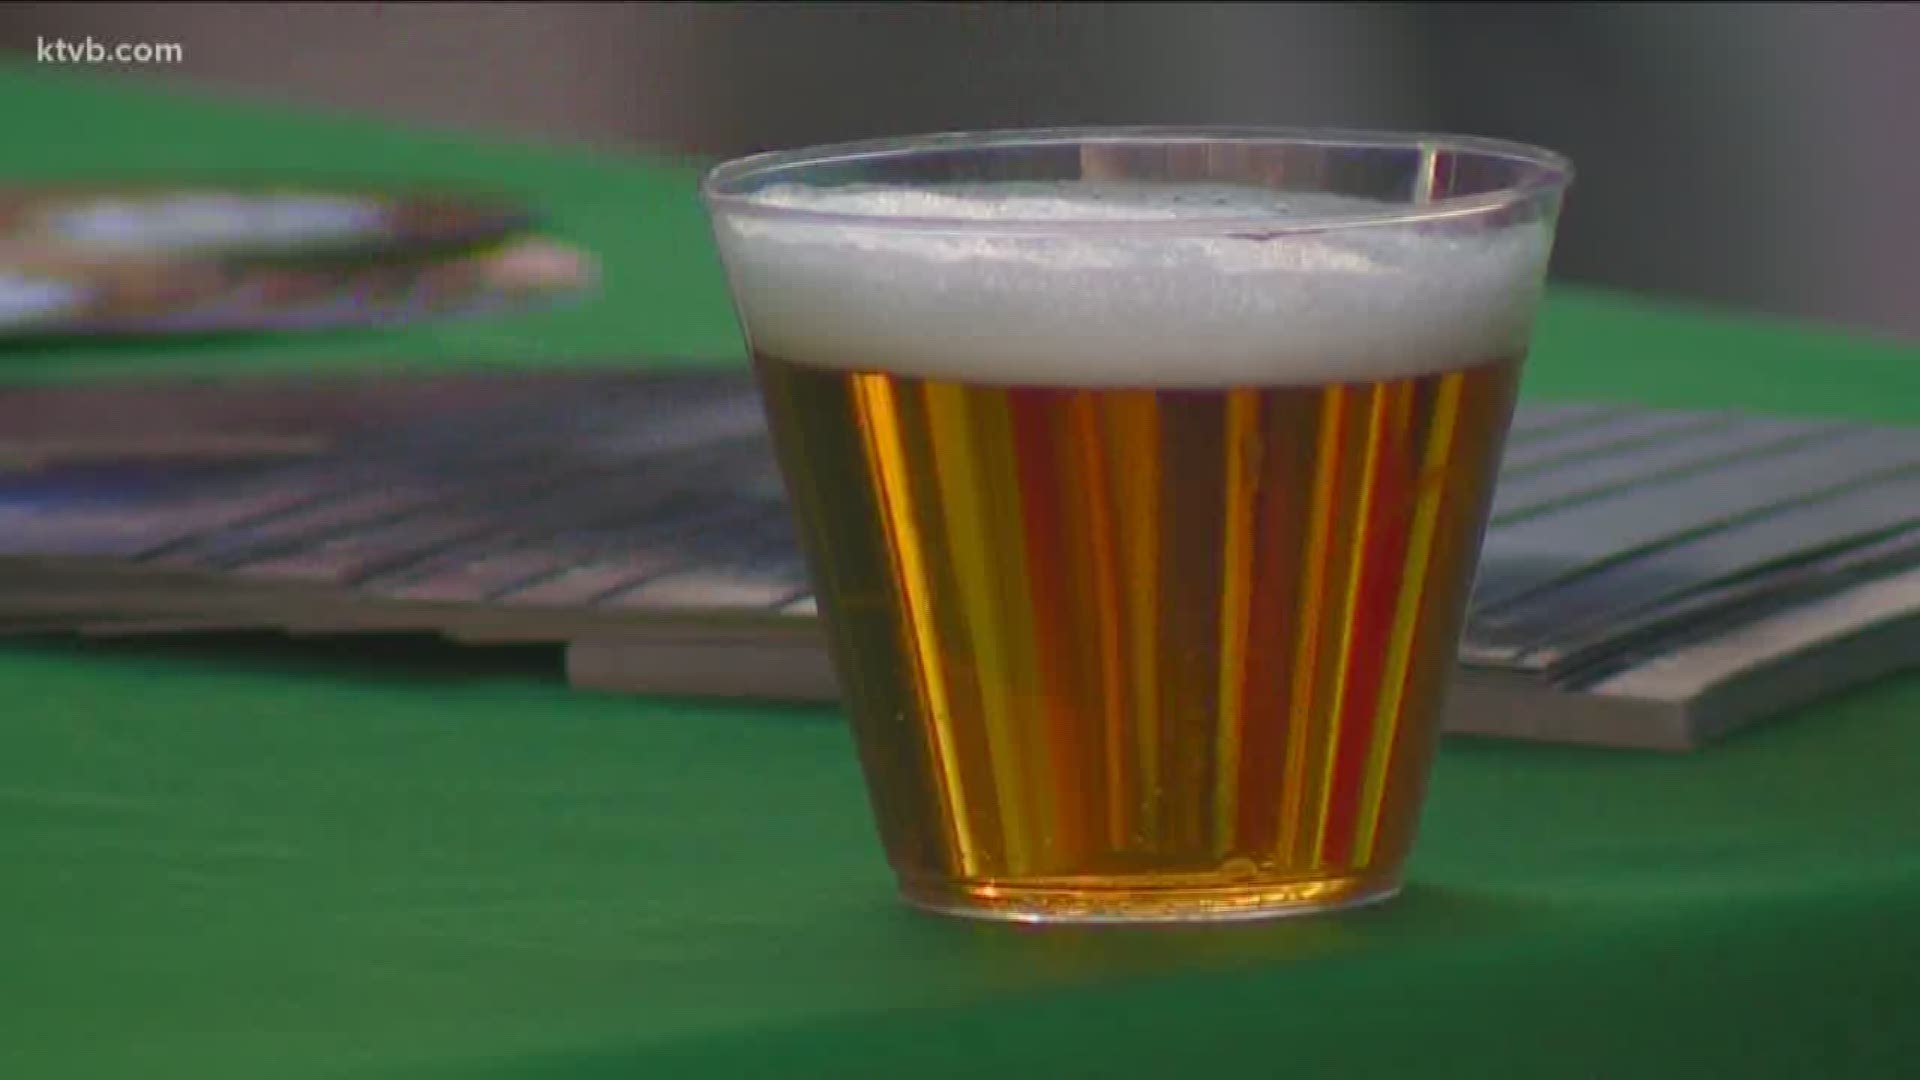 Used water that has been flushed down the toilet or sent down the drain is treated at Boise facilities, re-treated and then used to make beer and cider.